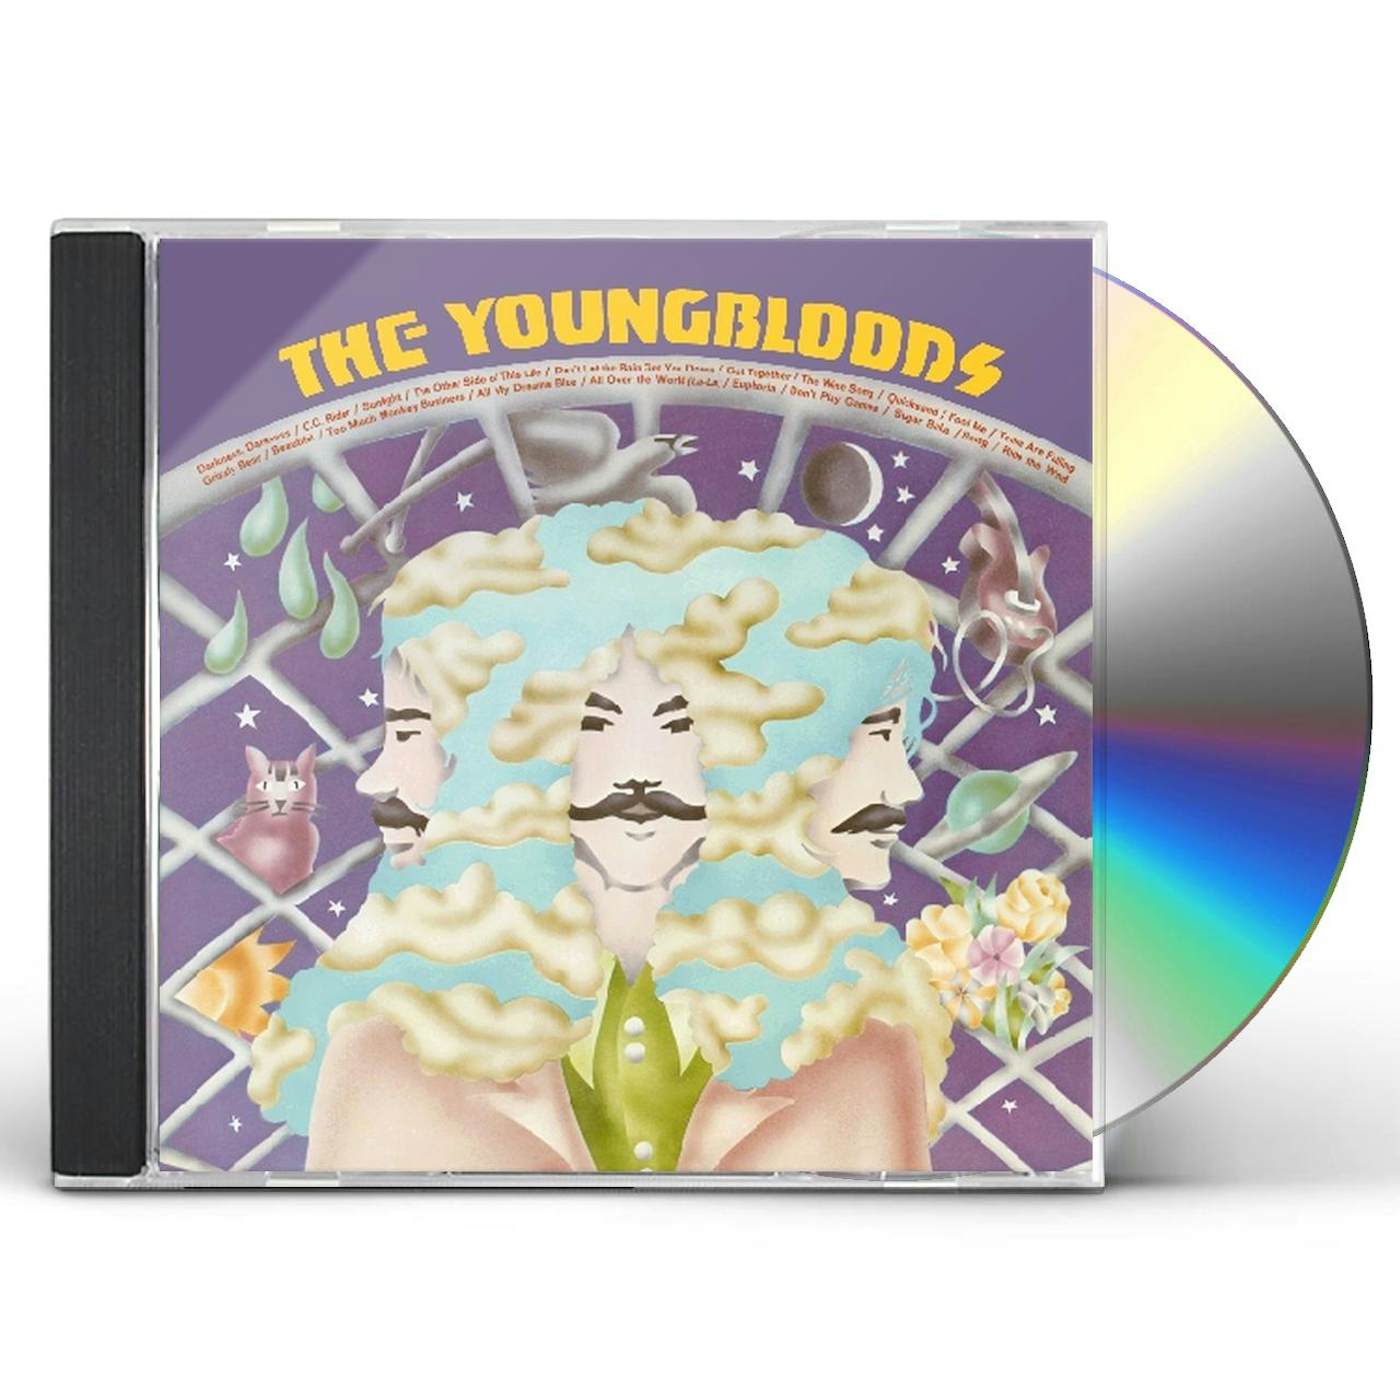 THIS IS THE YOUNGBLOODS CD